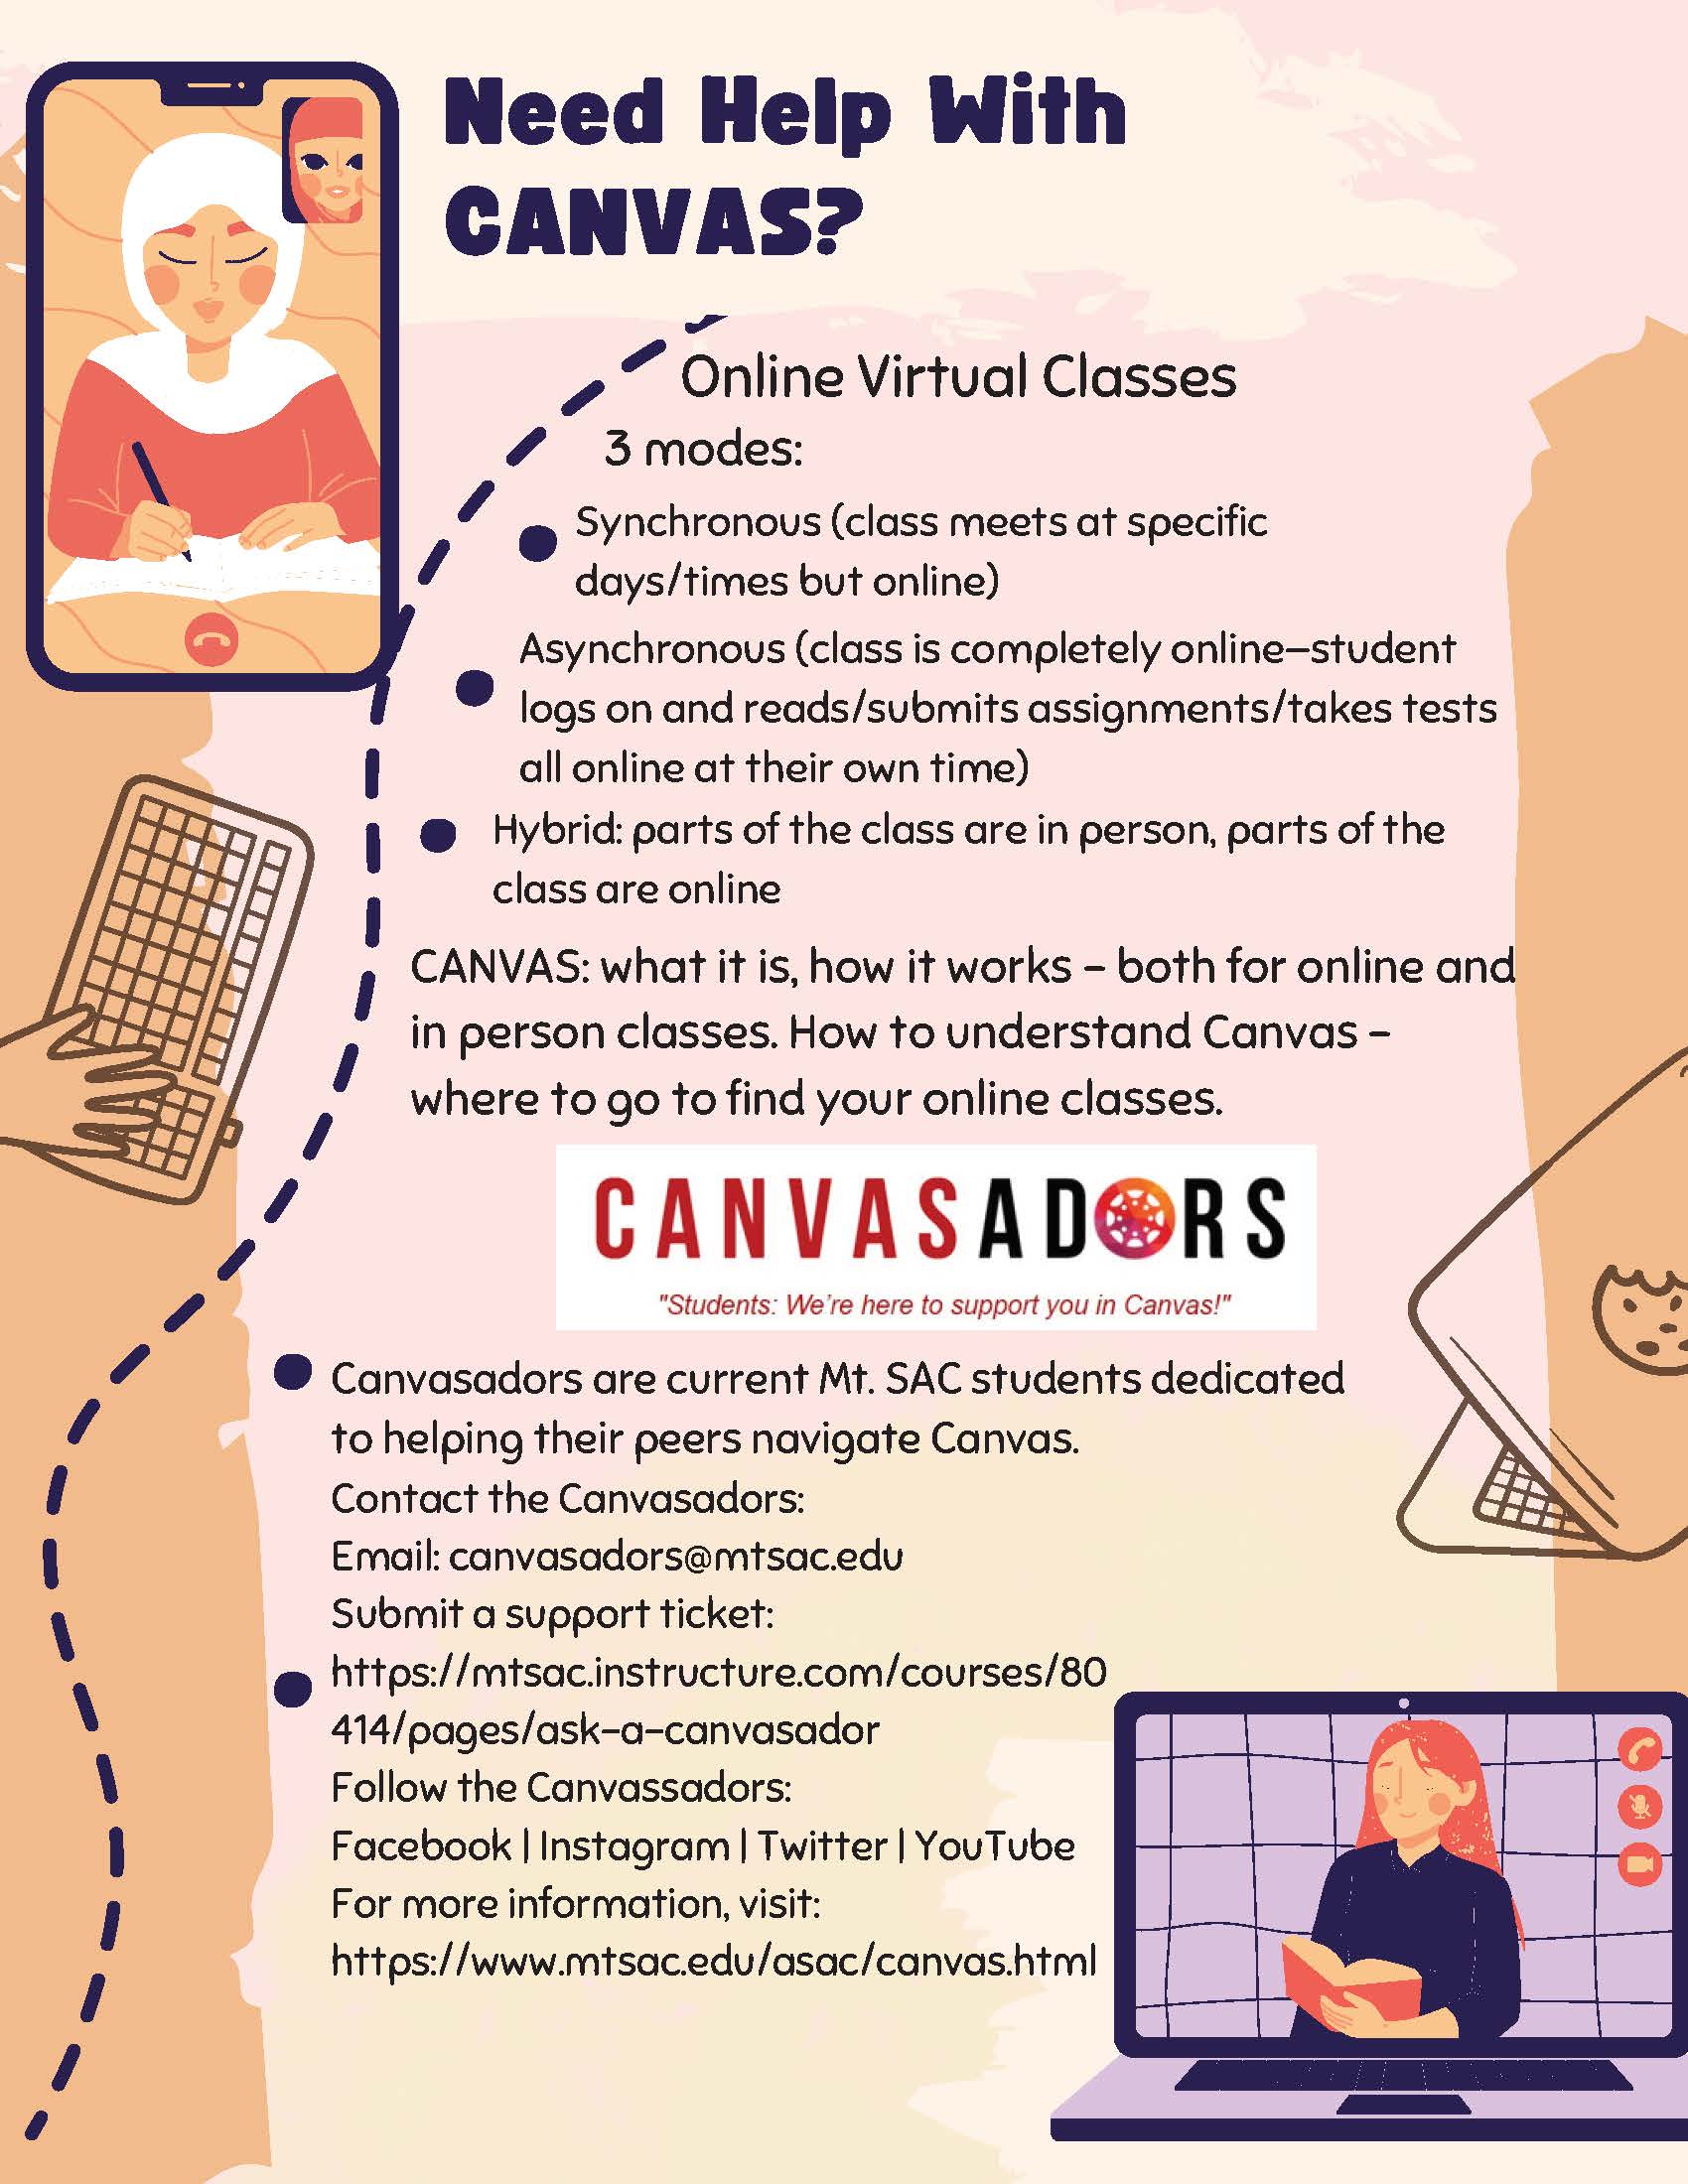 Need Help with Canvas?